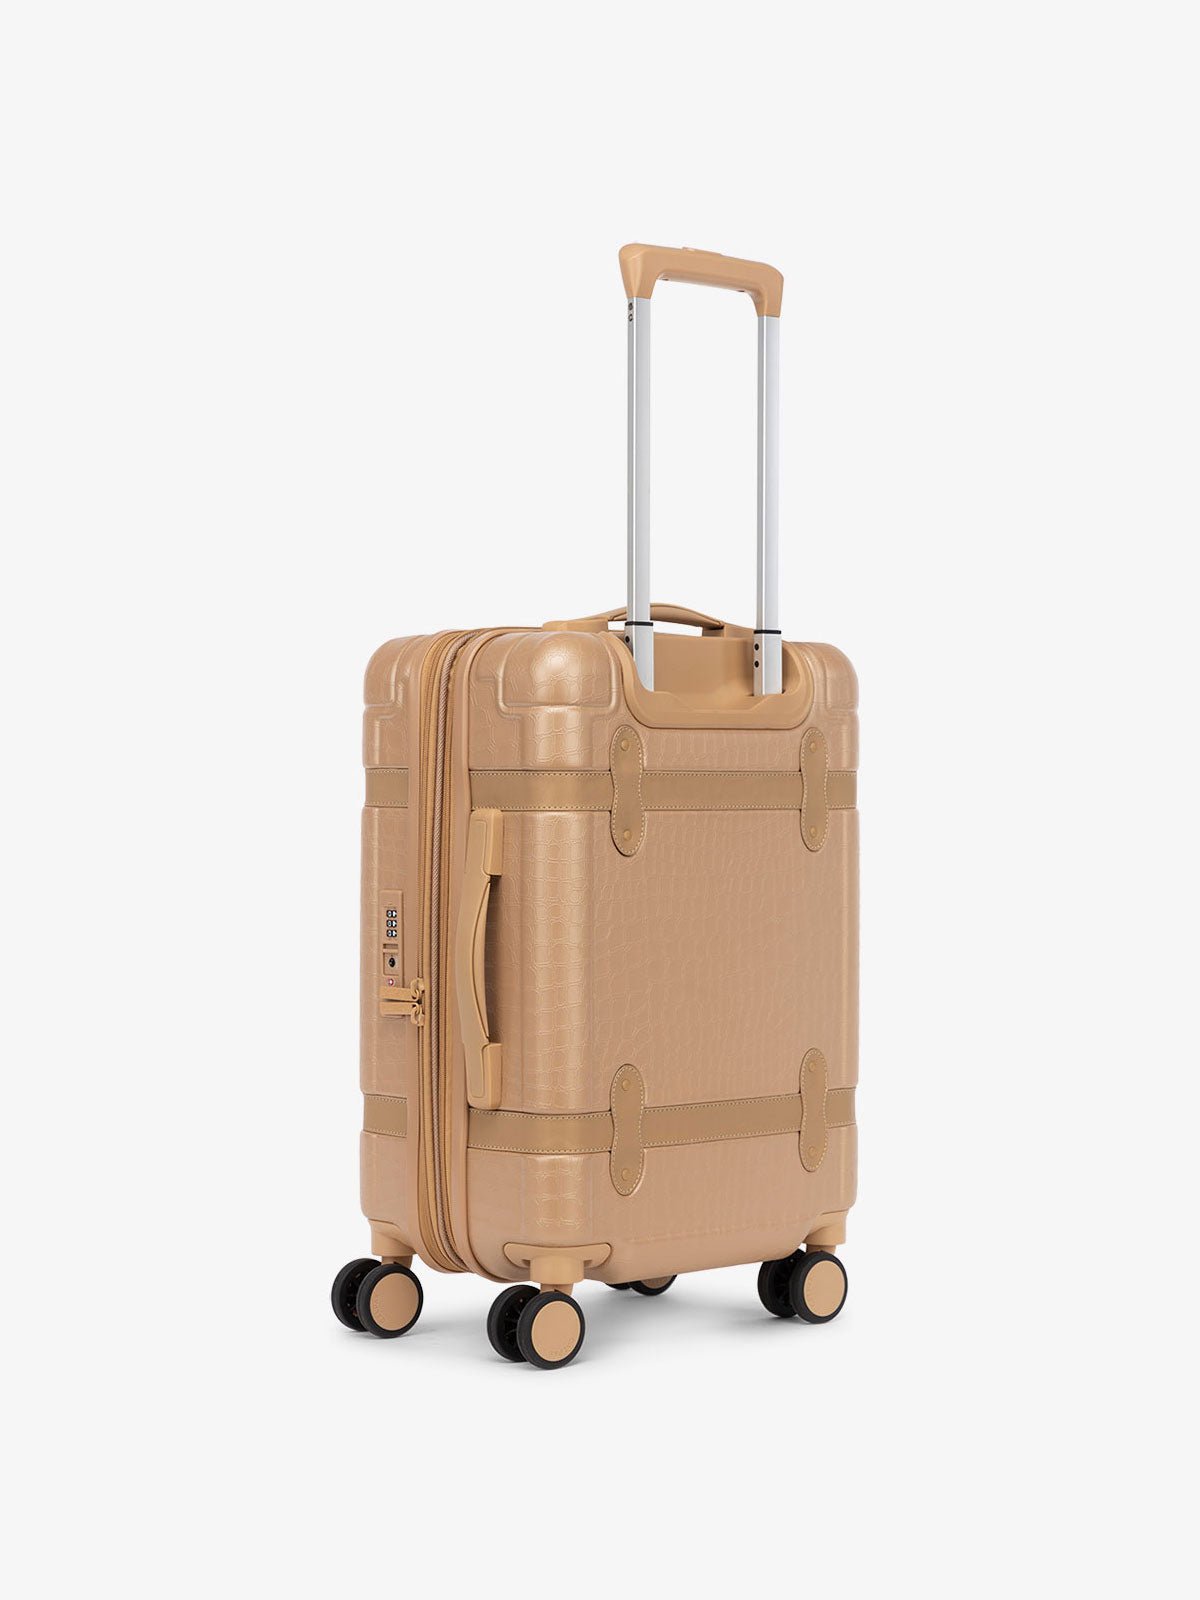 beige almond hard shell CALPAK TRNK suitcase with four 360 wheels in vintage trunk style carry-on luggage